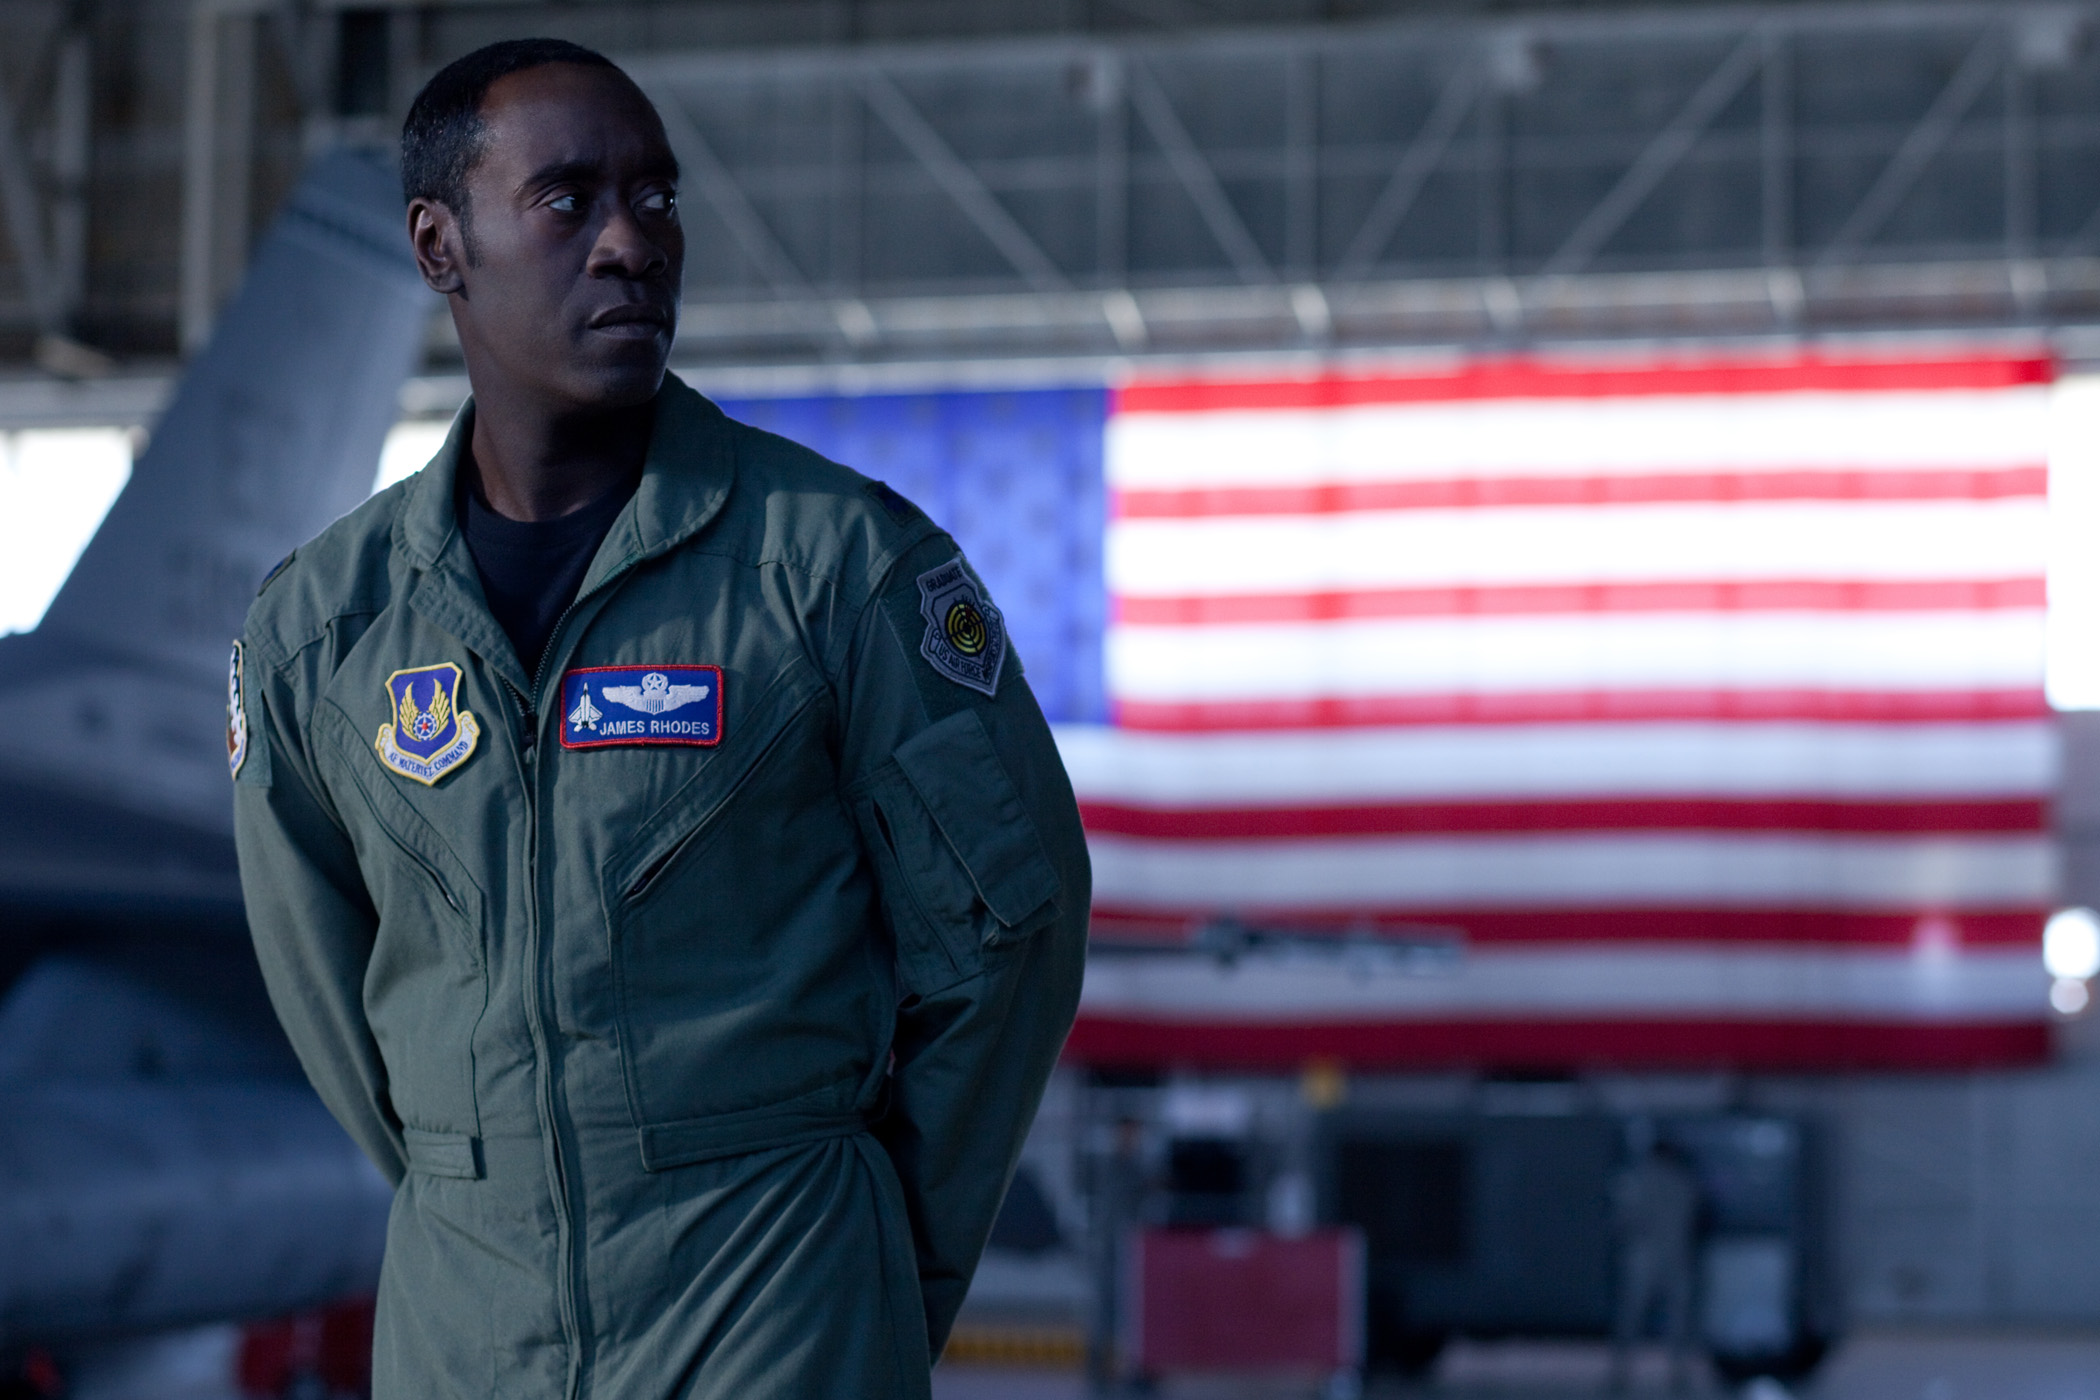 Base Personnel Featured In New Iron Man Flick Los Angeles